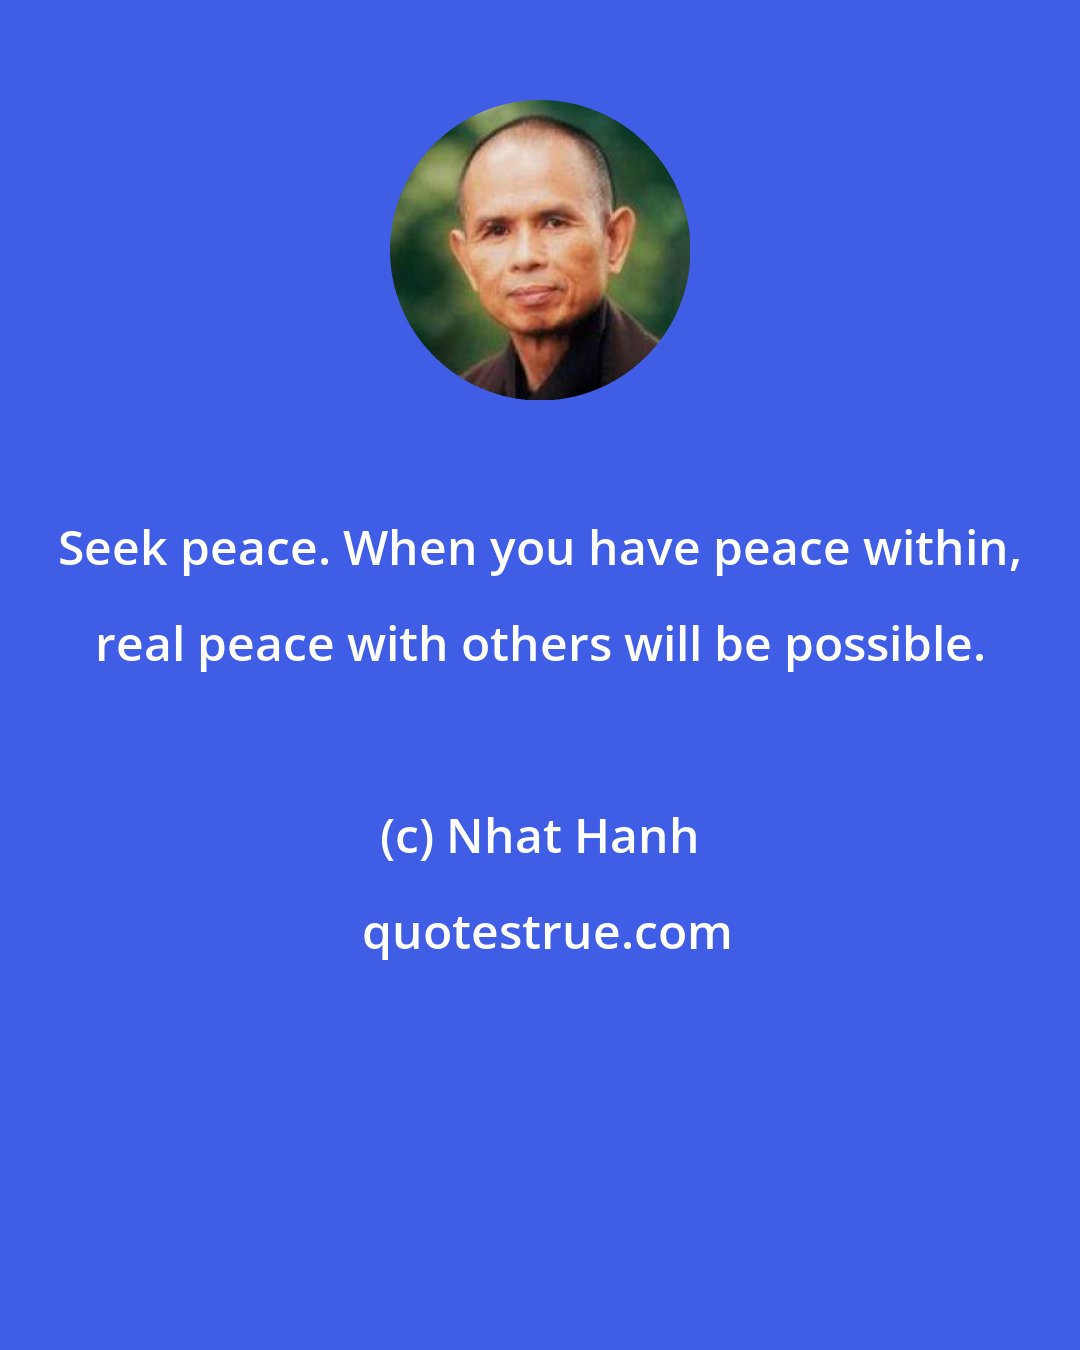 Nhat Hanh: Seek peace. When you have peace within, real peace with others will be possible.